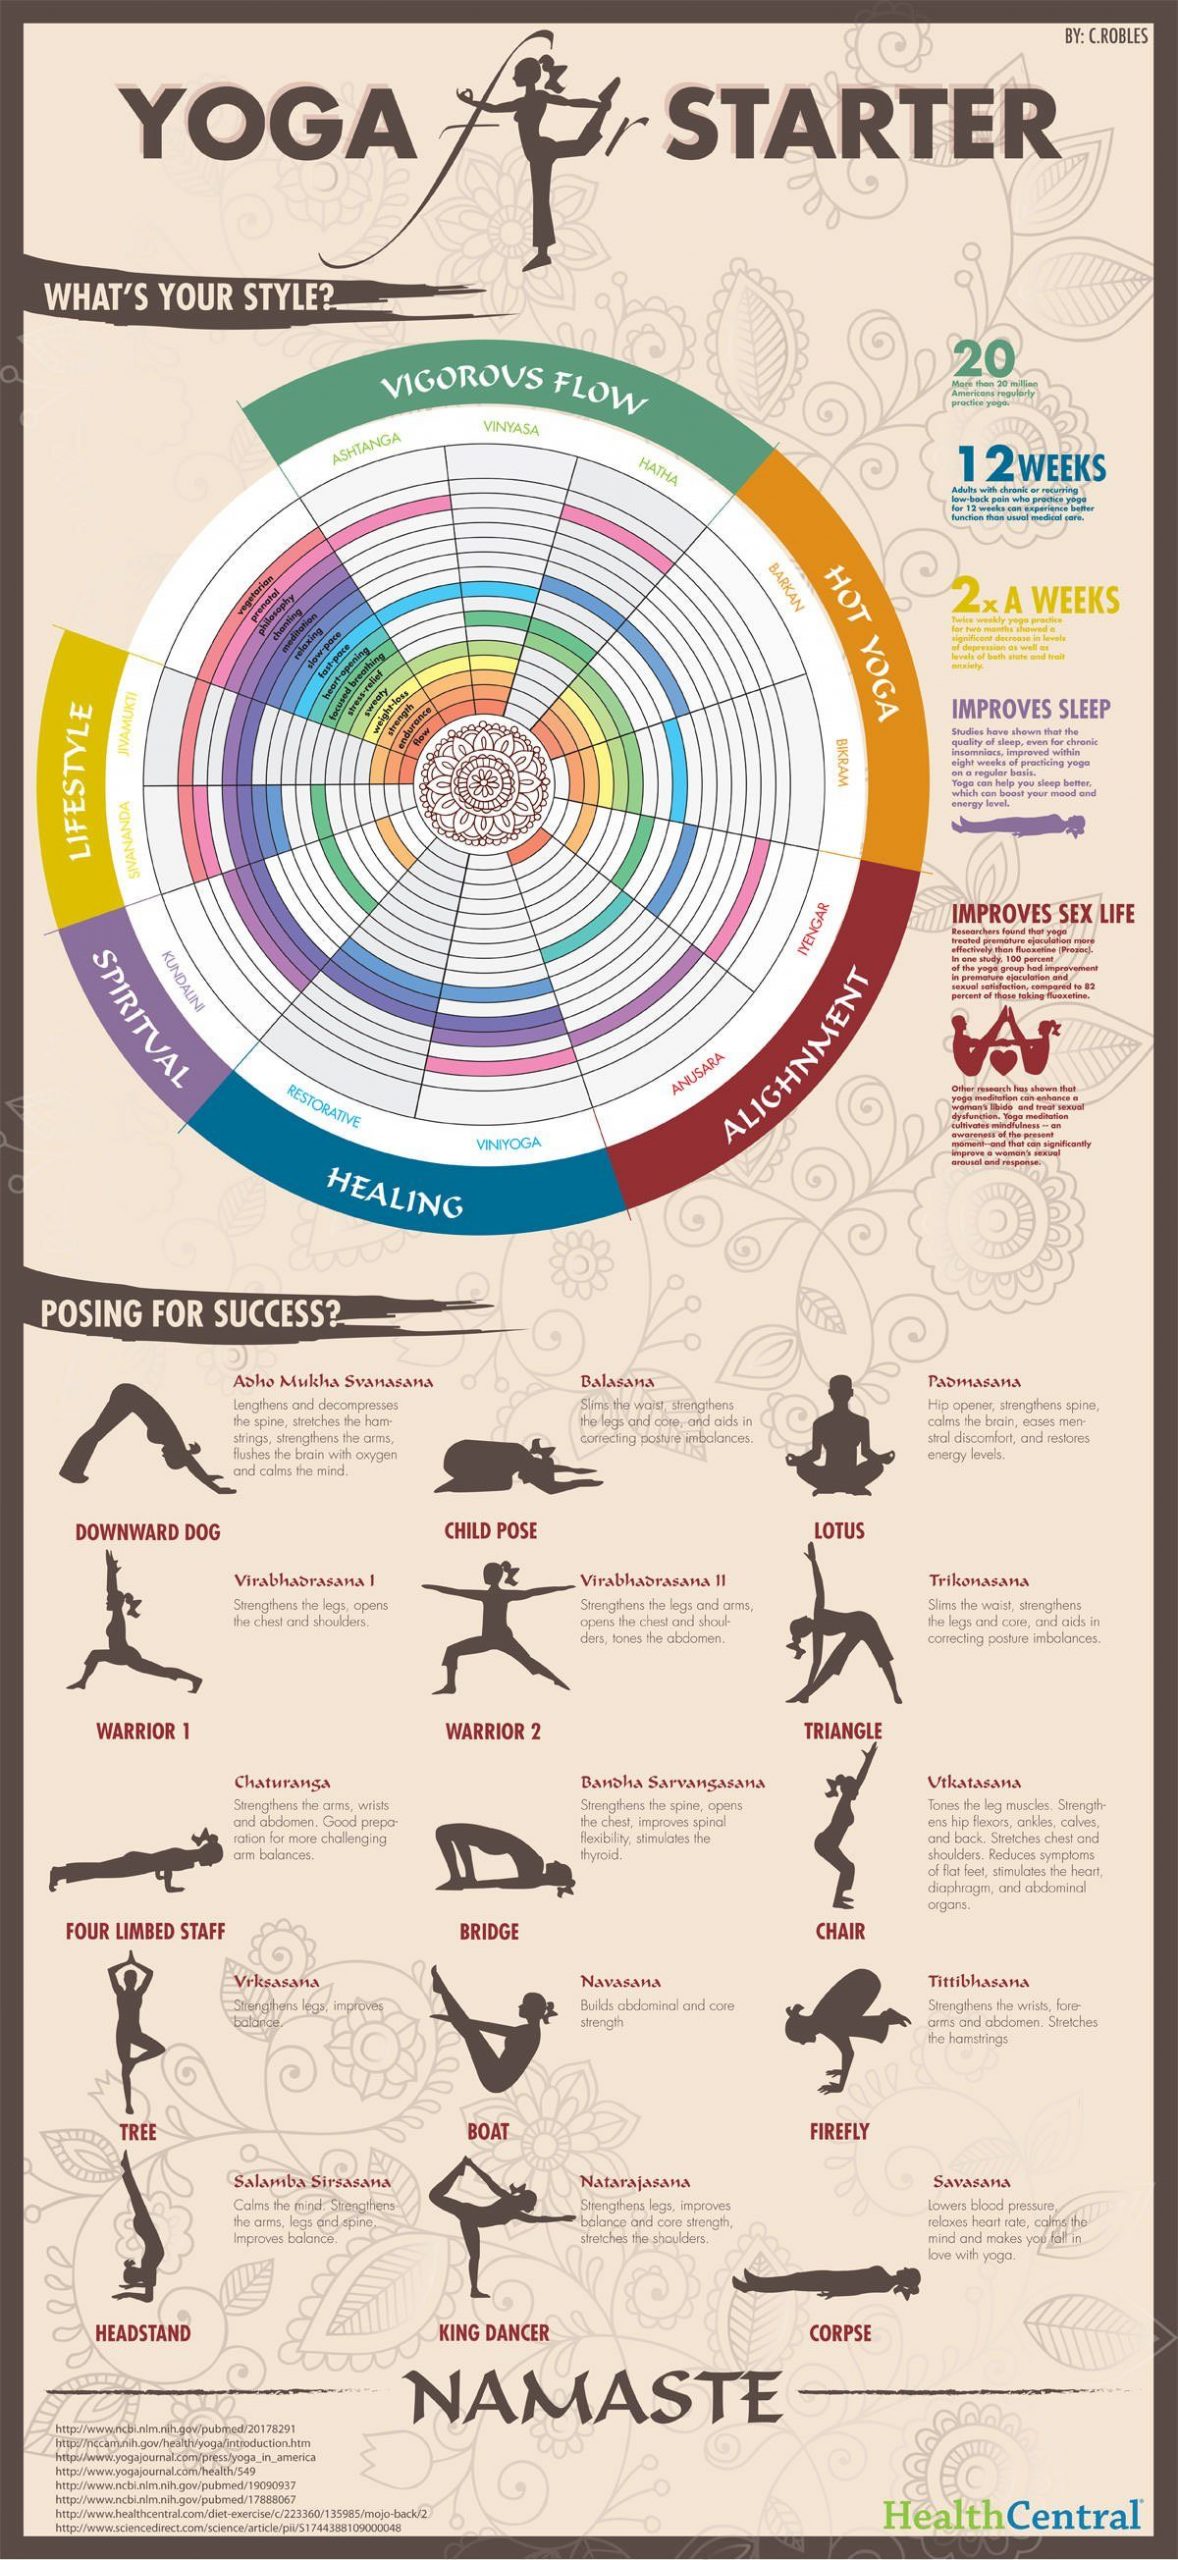 Yoga for Starters Infographic